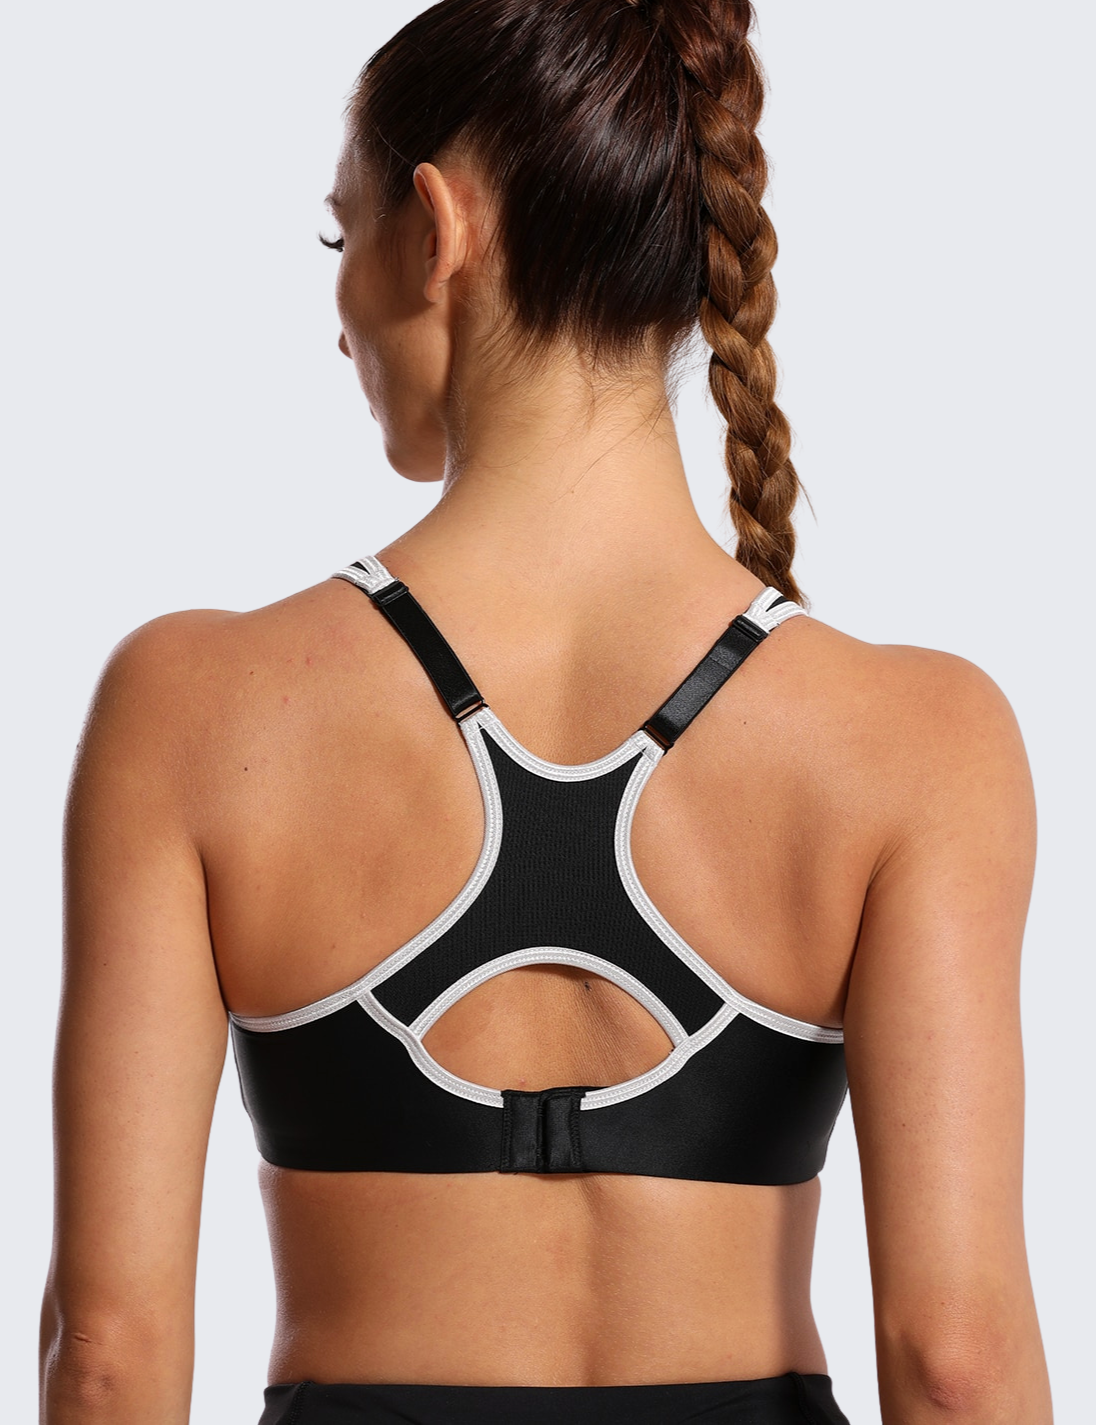 SYROKAN High Impact Sports Bras for Women Underwire Racerback No Bounce  - Stunning Motivation